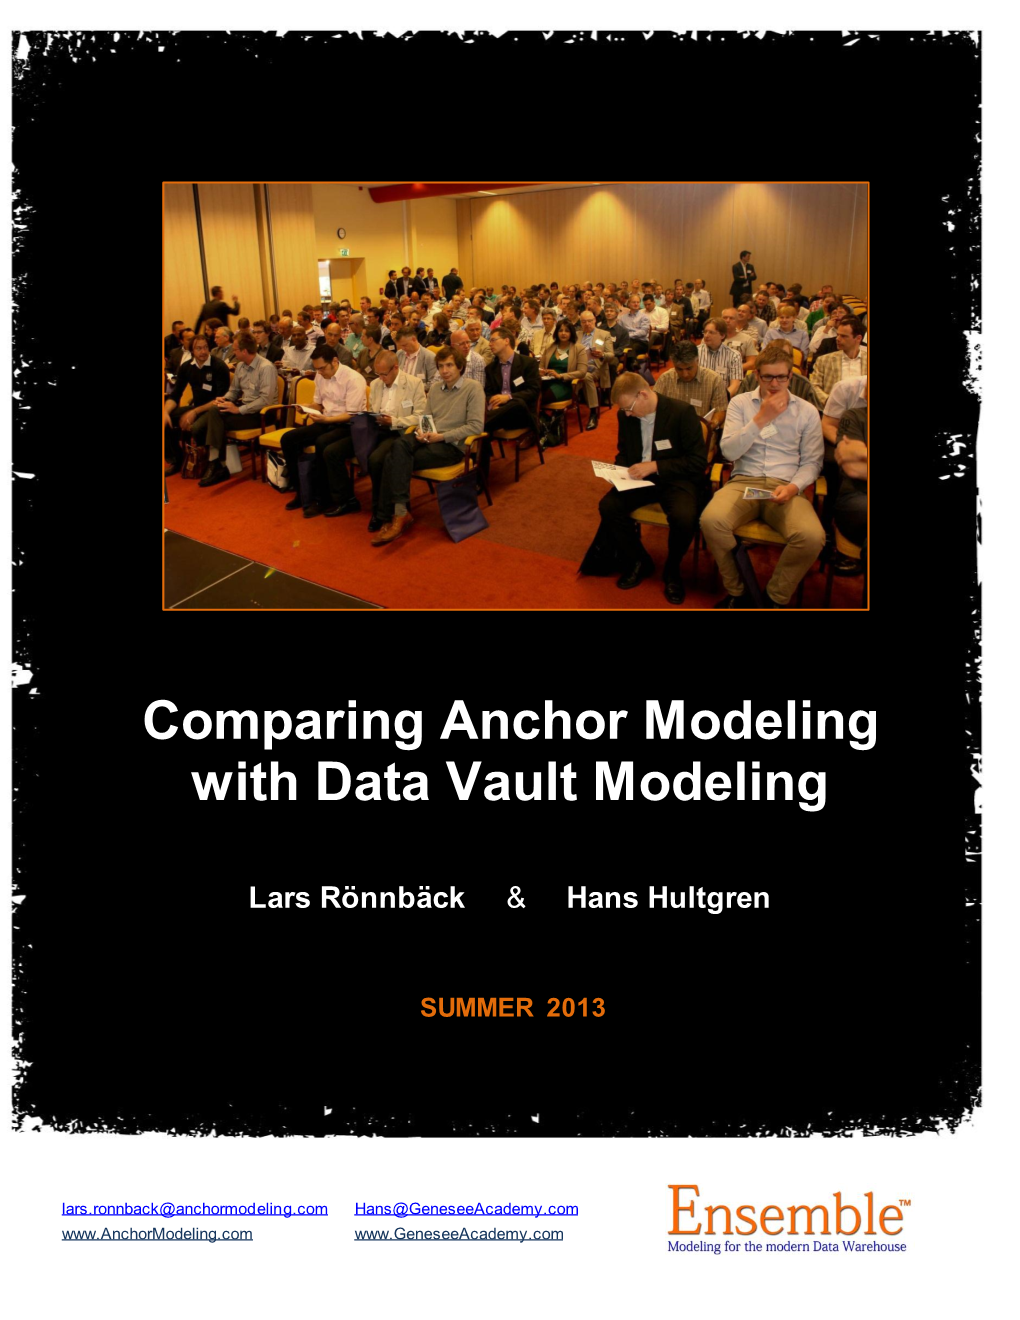 Comparing Anchor Modeling with Data Vault Modeling